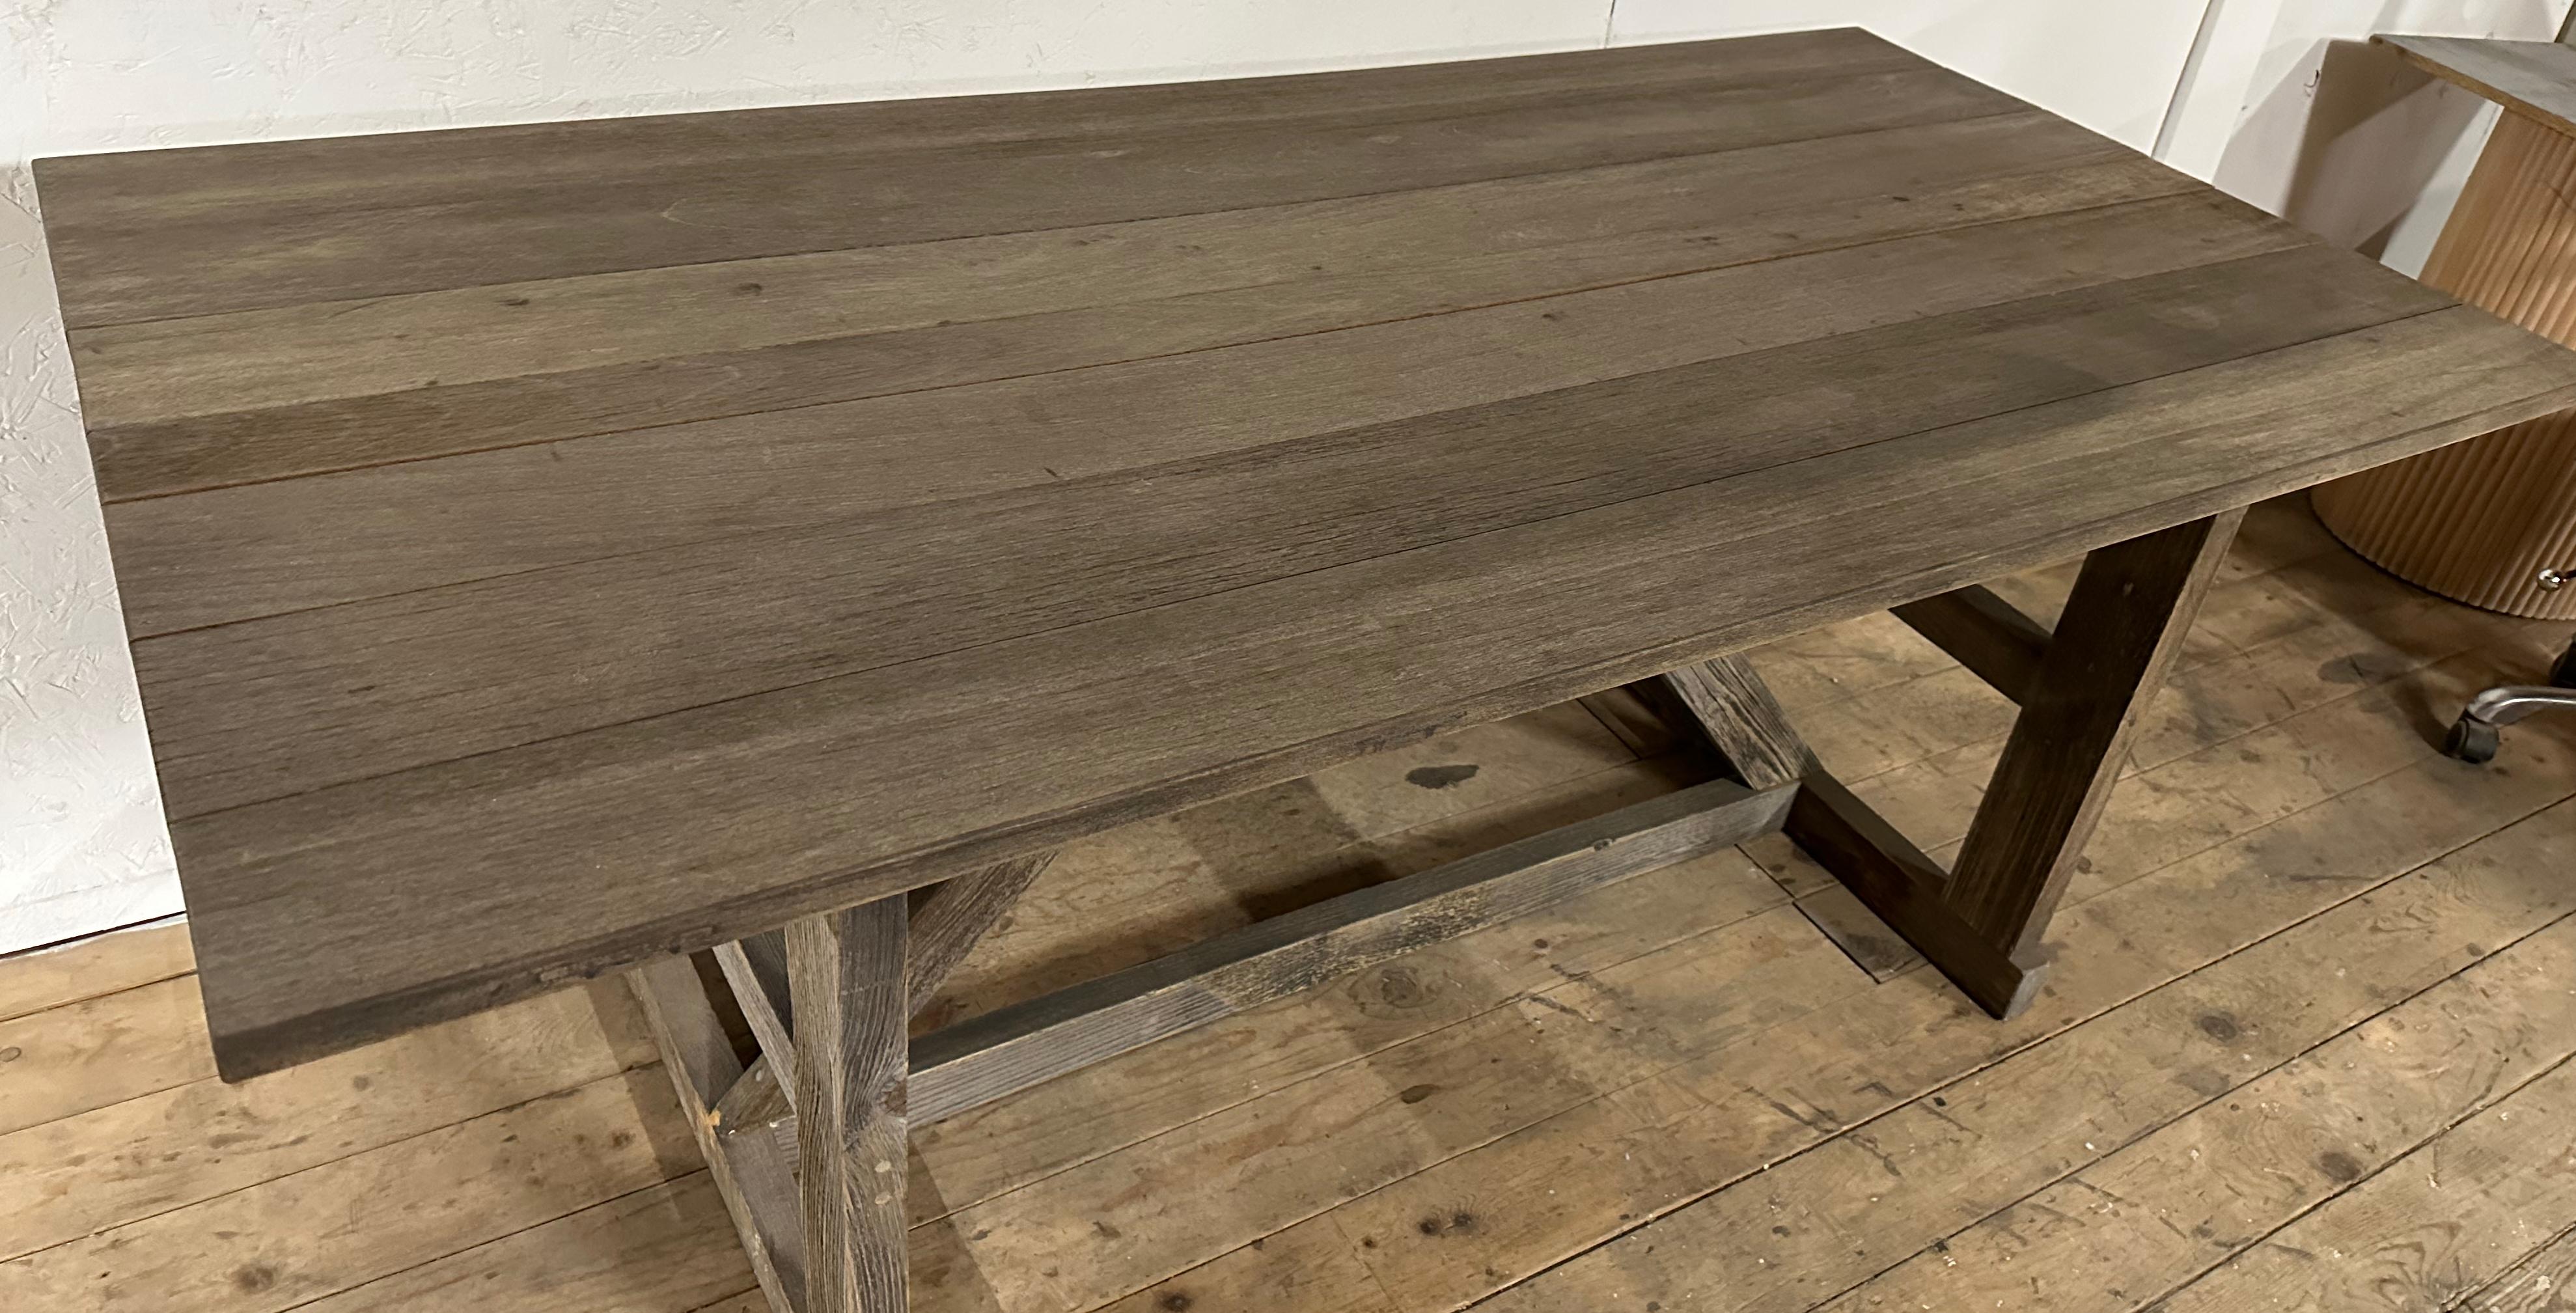 Industrial Country Style work table, kitchen, or dining table made from reclaimed wood. Use it in a modern or traditional setting, this table will add interest and character to any room.  Antique distressed farm table. Rustic table. Kitchen prep